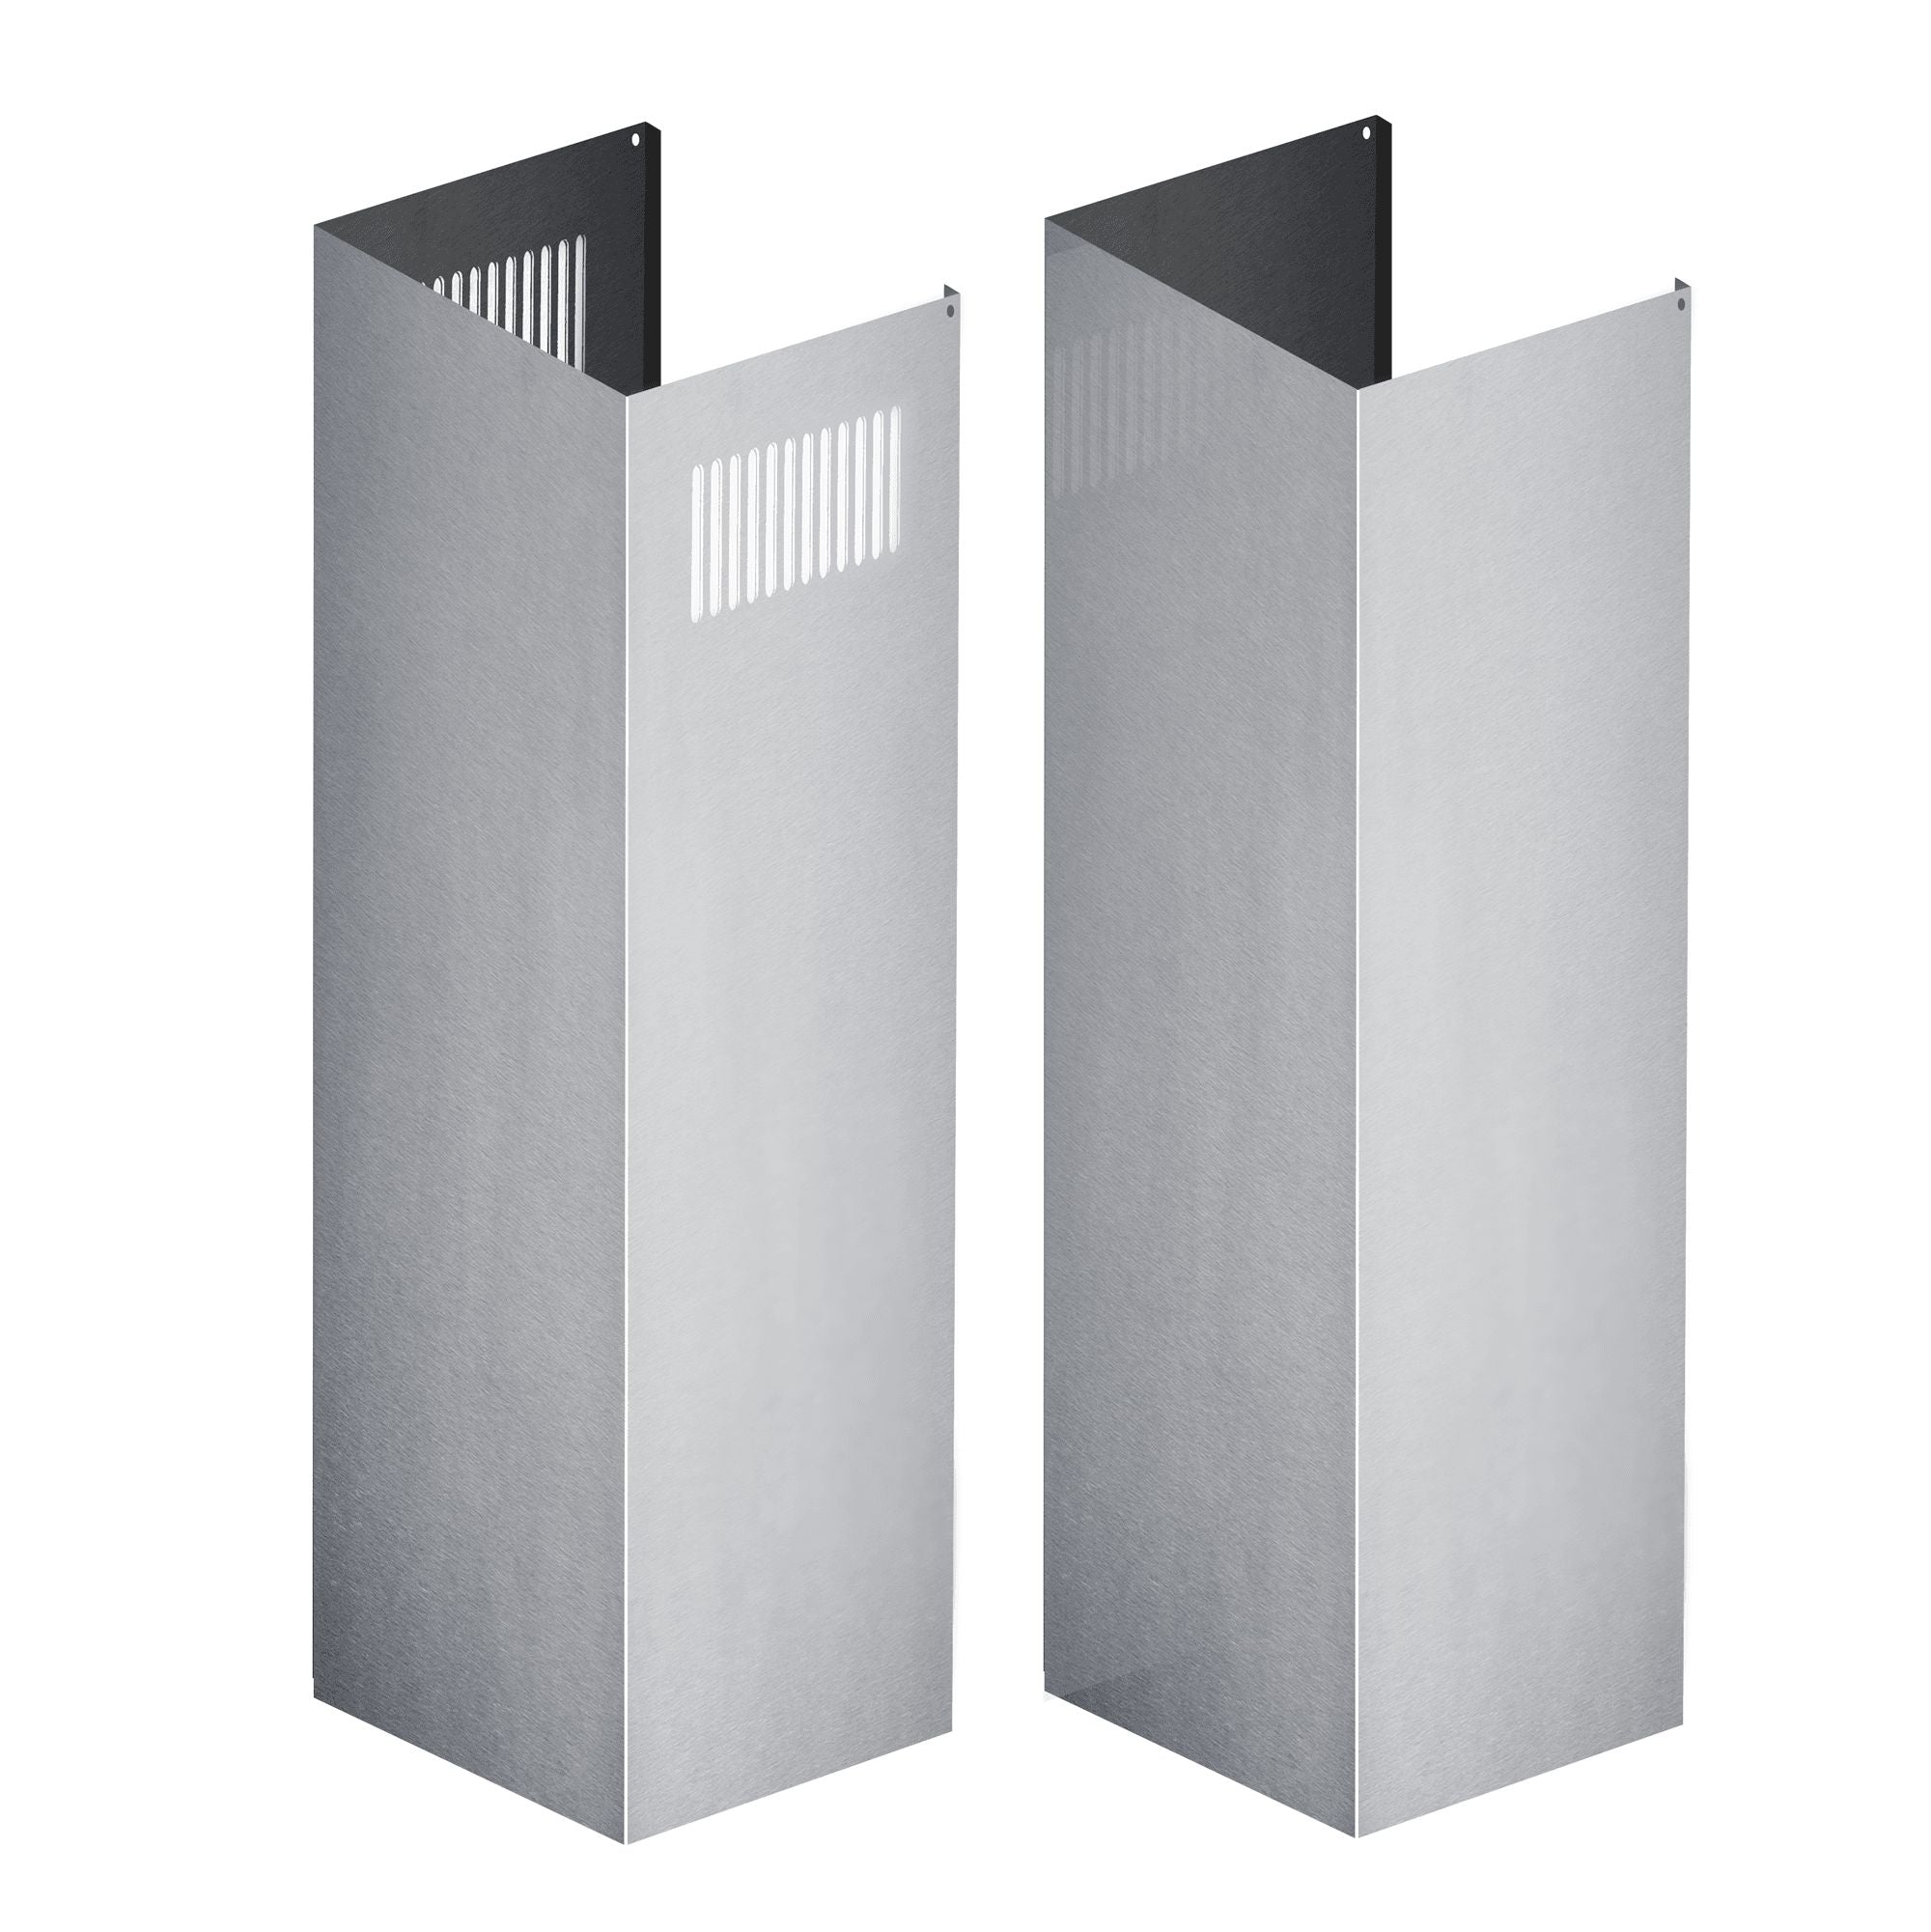 ZLINE 2-36 in. Chimney Extensions for 10 ft. to 12 ft. Ceilings (2PCEXT-KB/KL2/KL3-304)